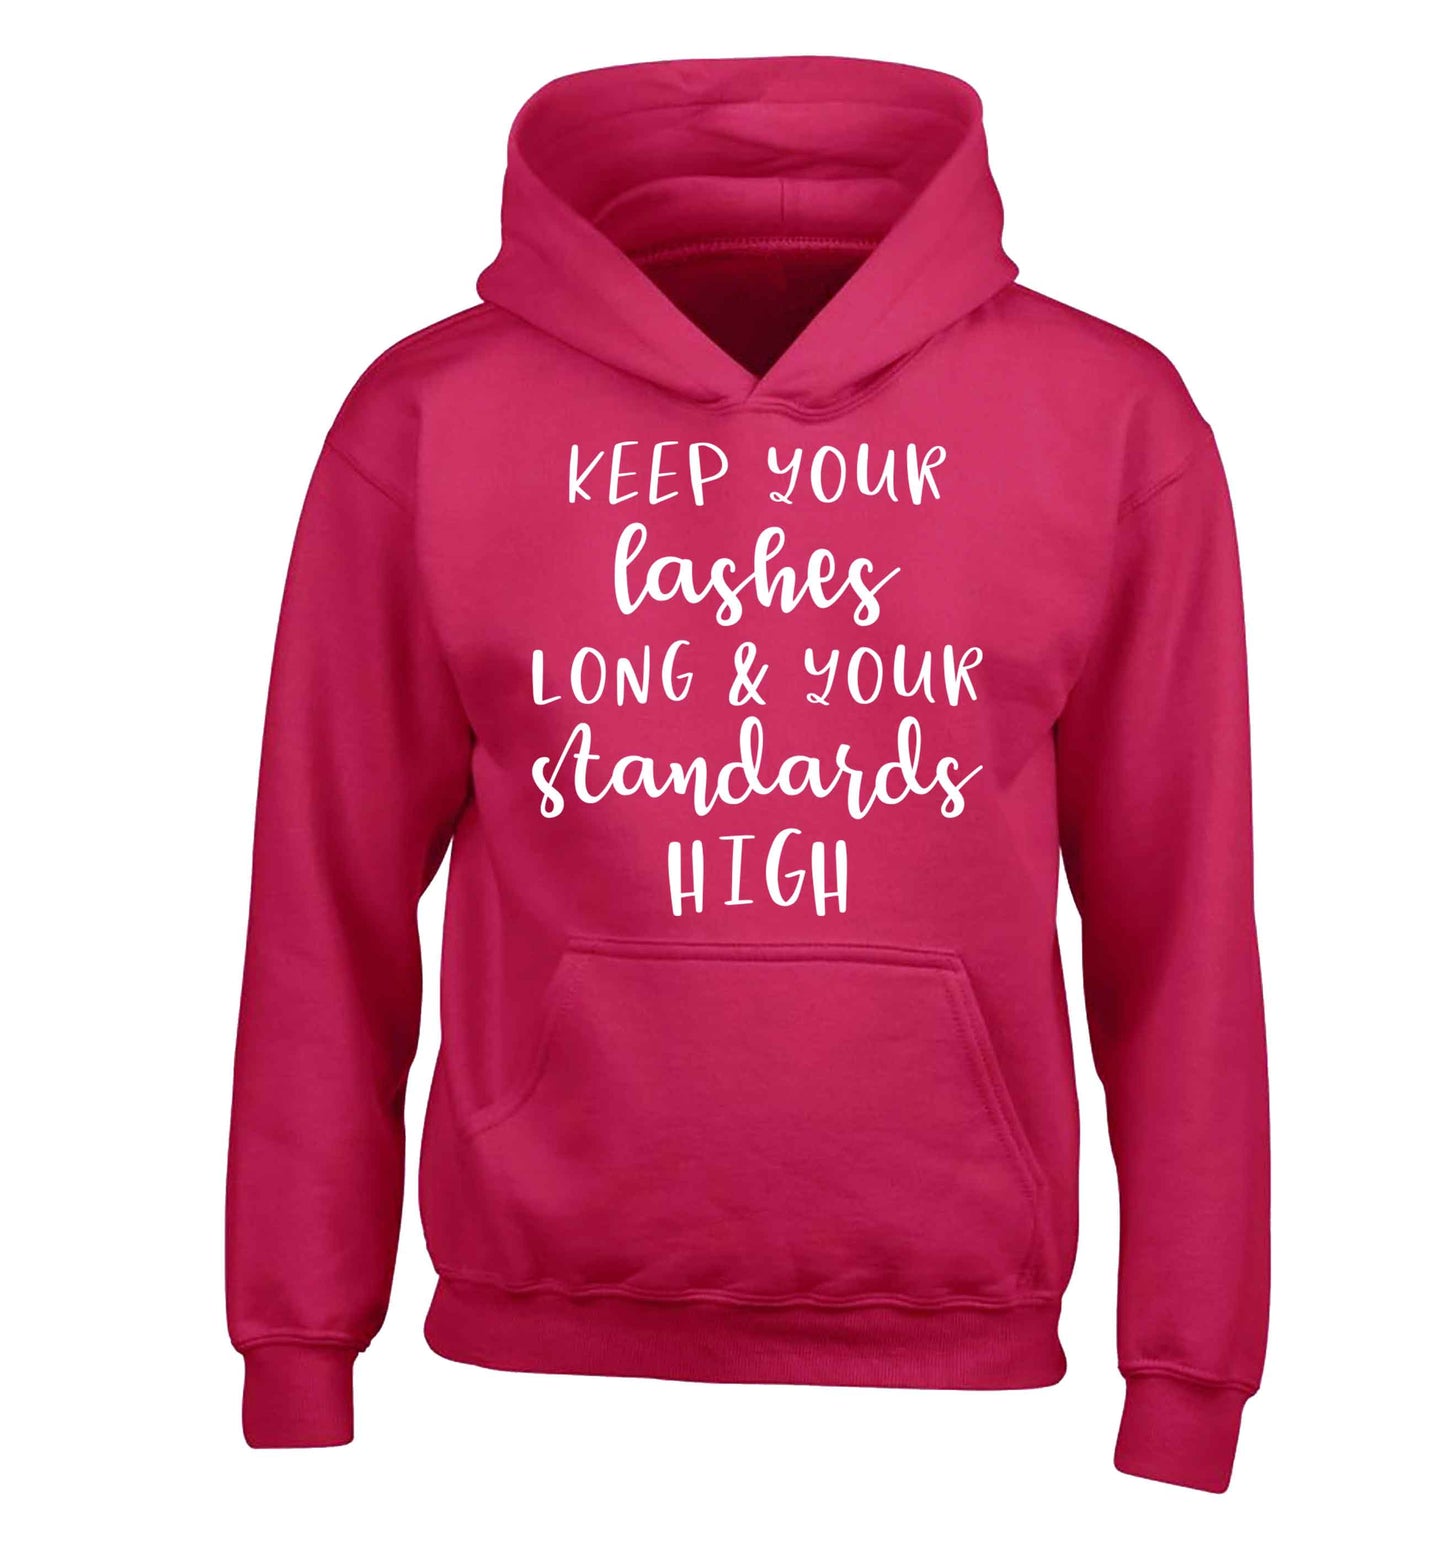 Keep your lashes long and your standards high children's pink hoodie 12-13 Years